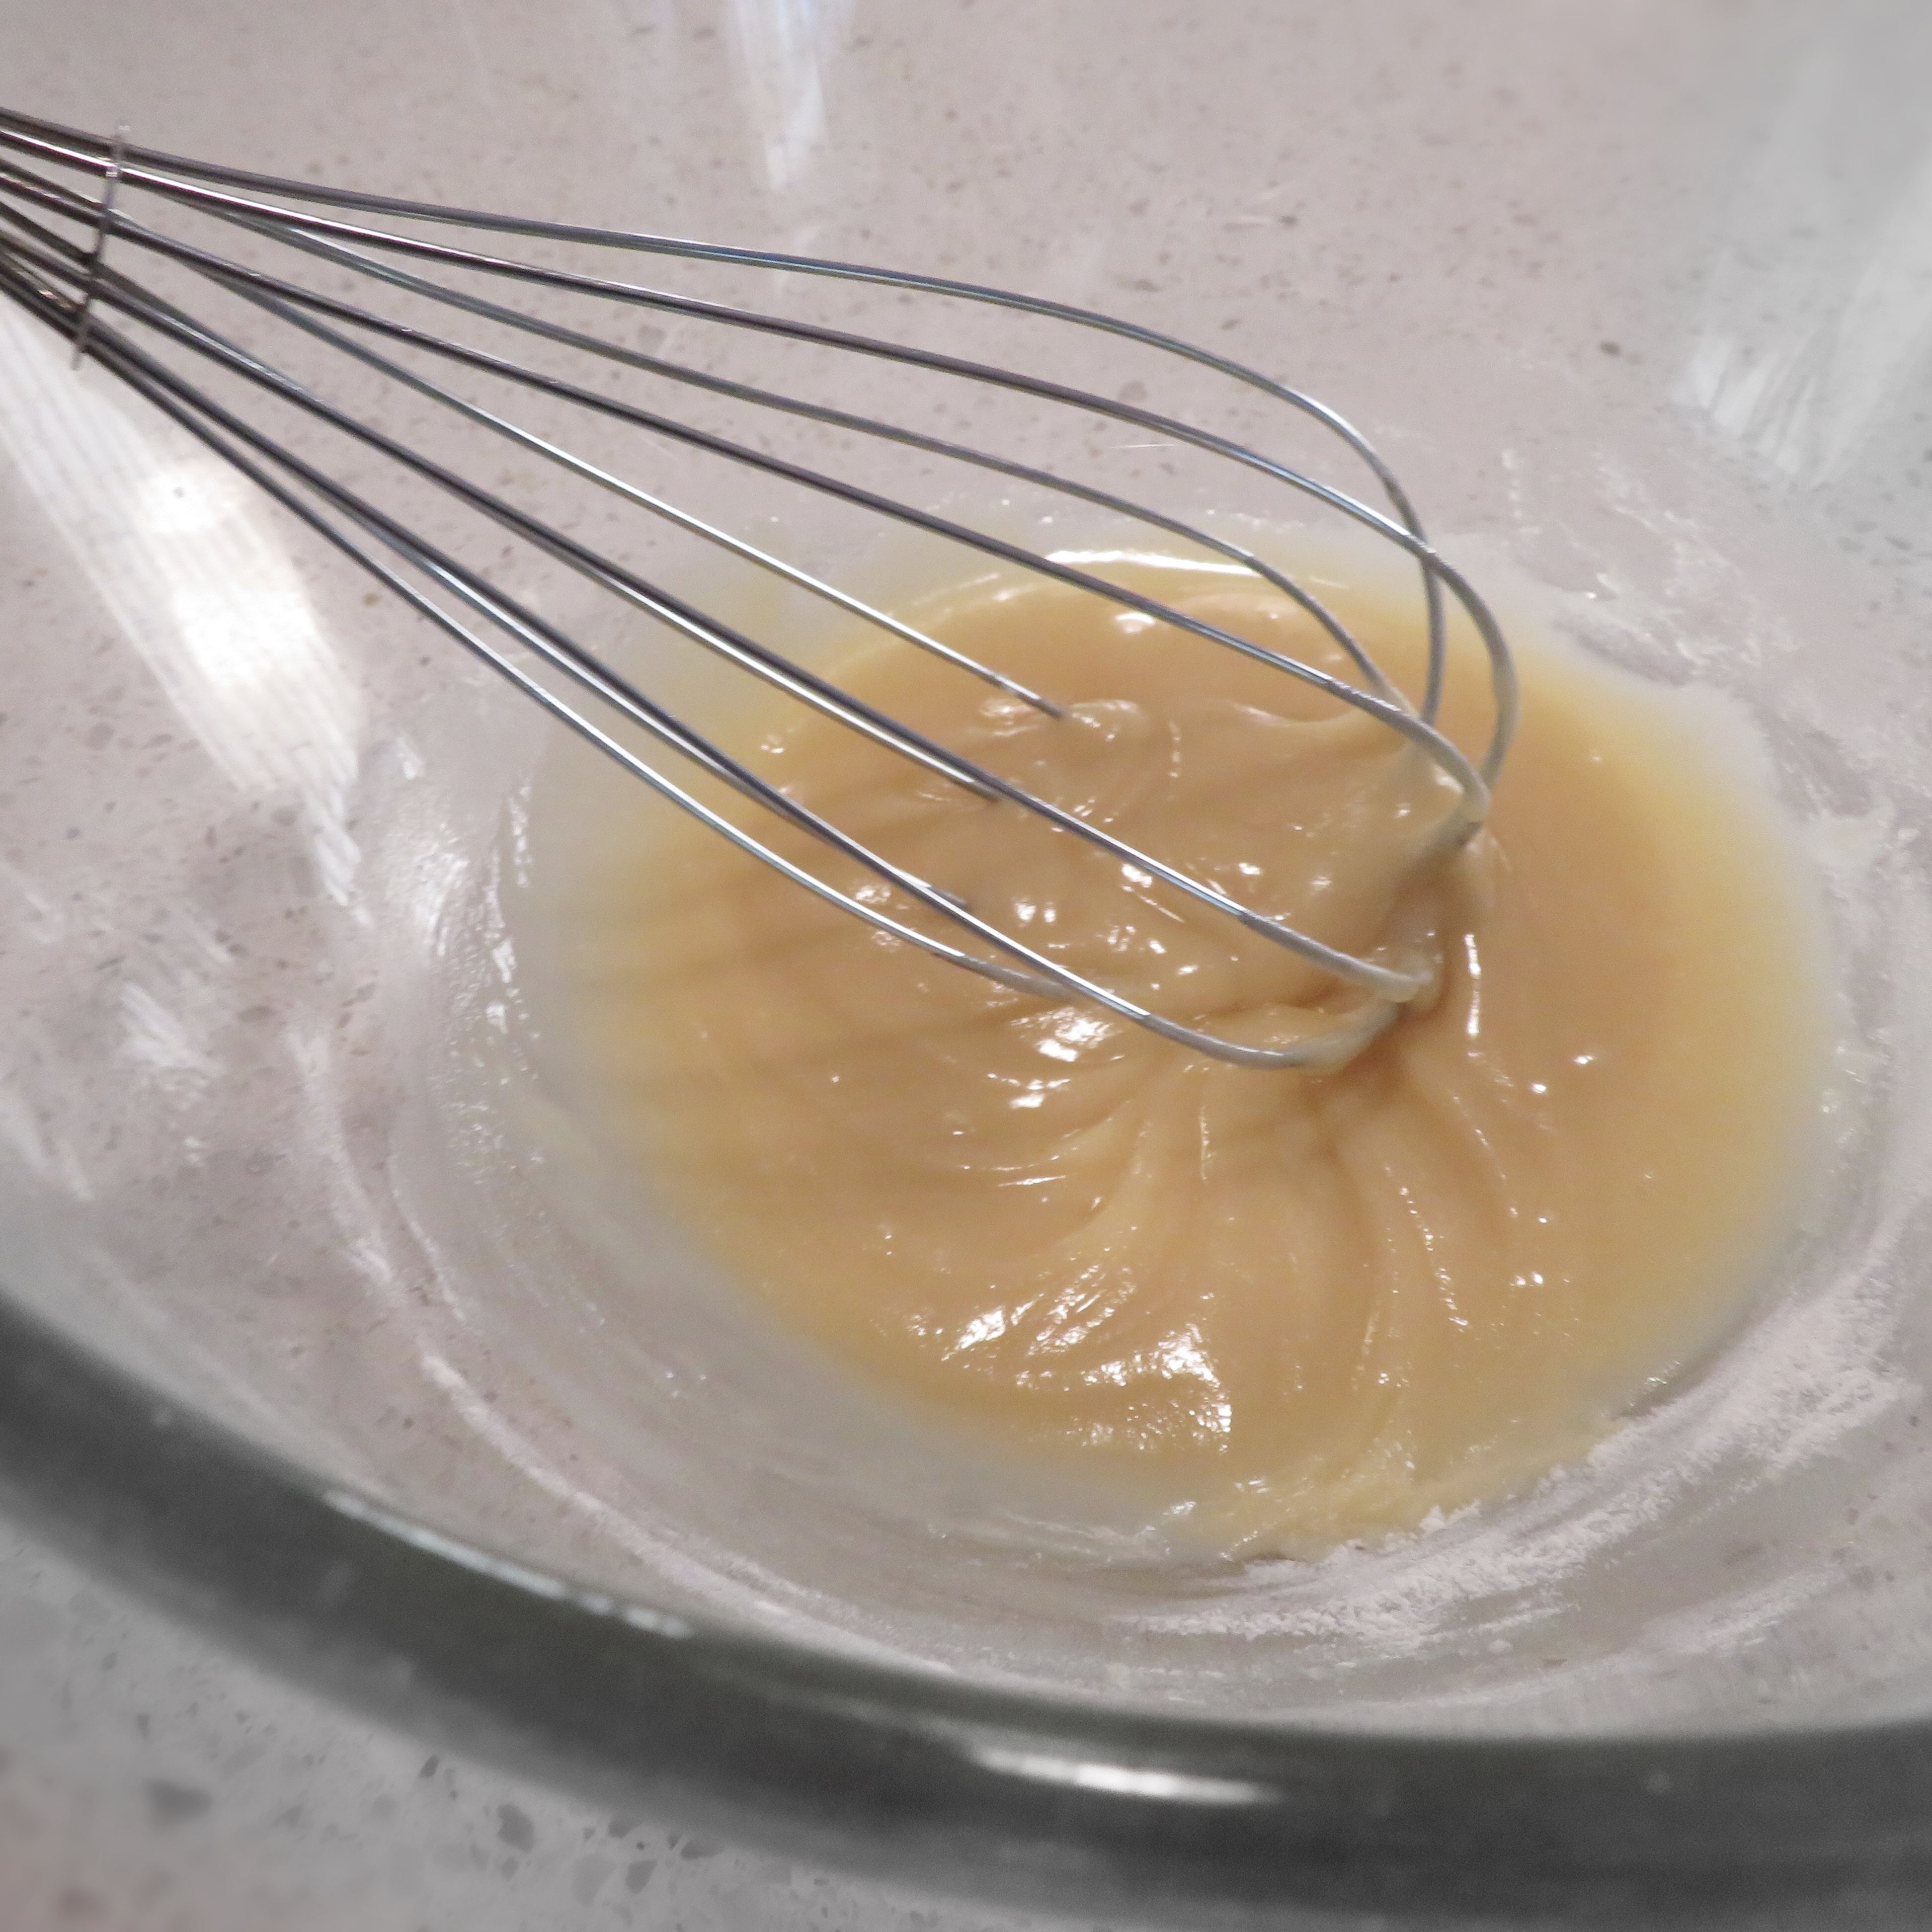 Add little bit of self raising flour at a time to oil and stir with a whisk.